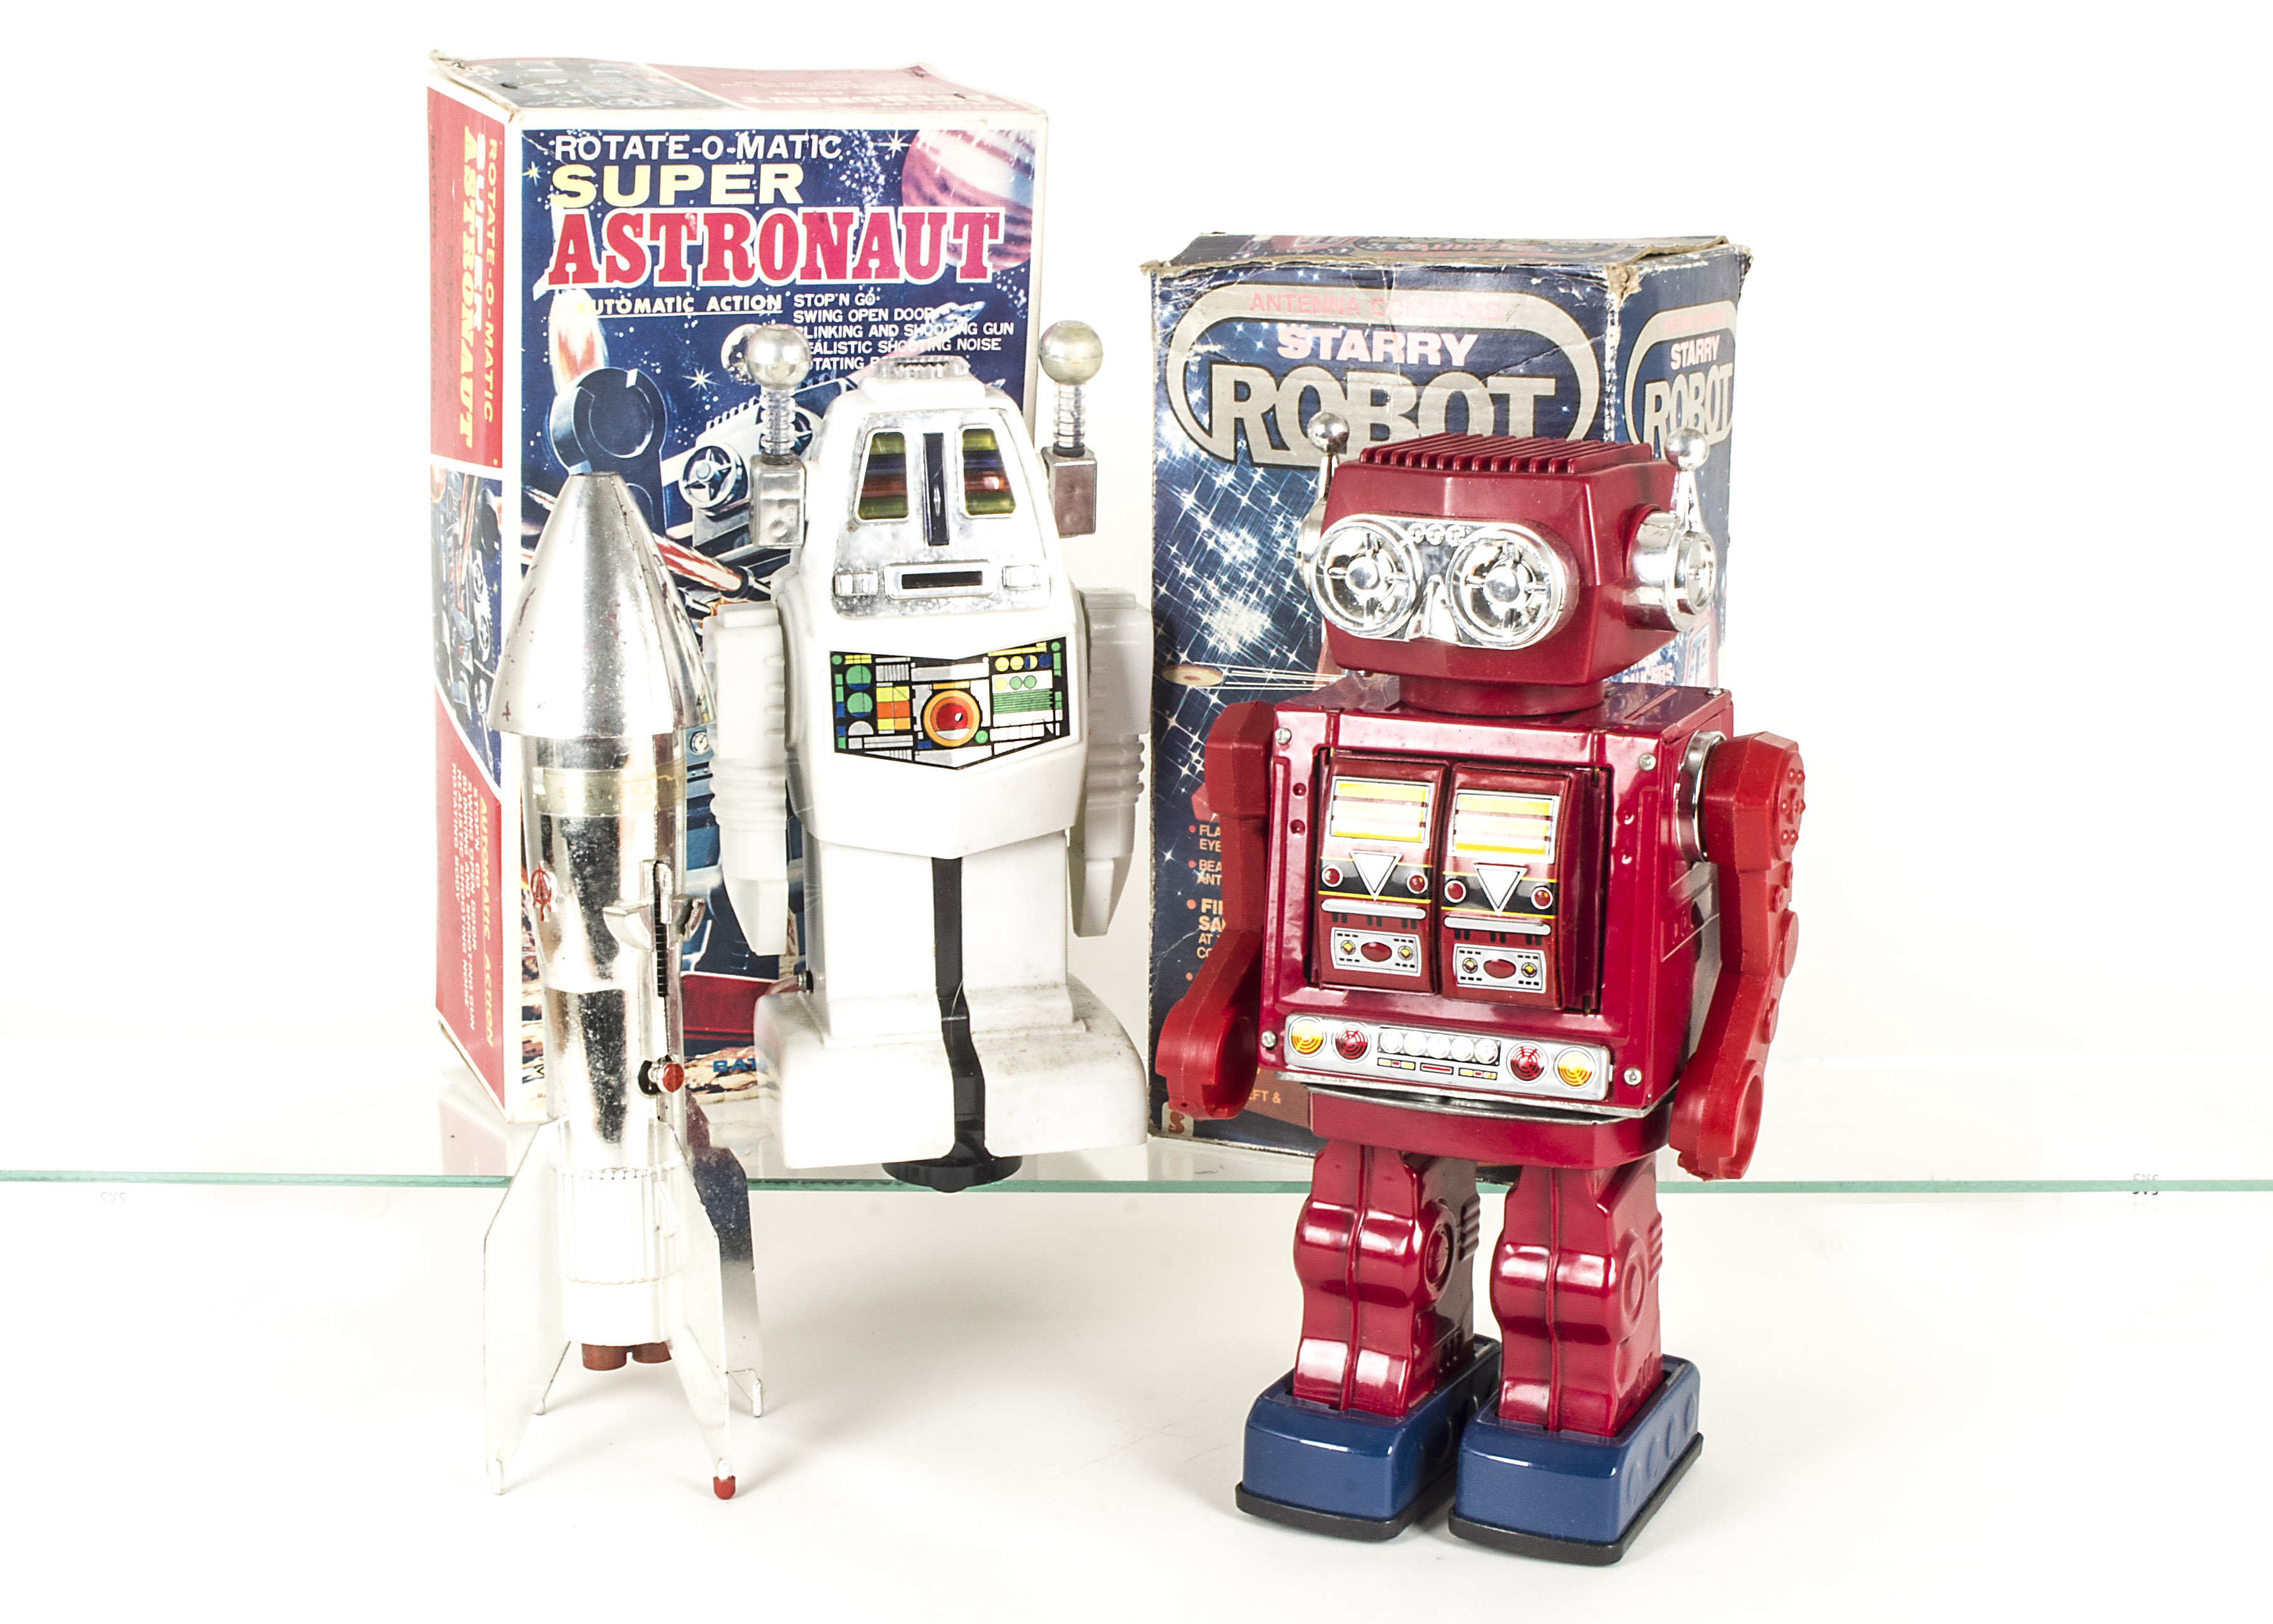 S.J.M (Taiwan) Battery Operated Rotate-O-Matic Super Astronaut Robot, red tinplate body, plastic